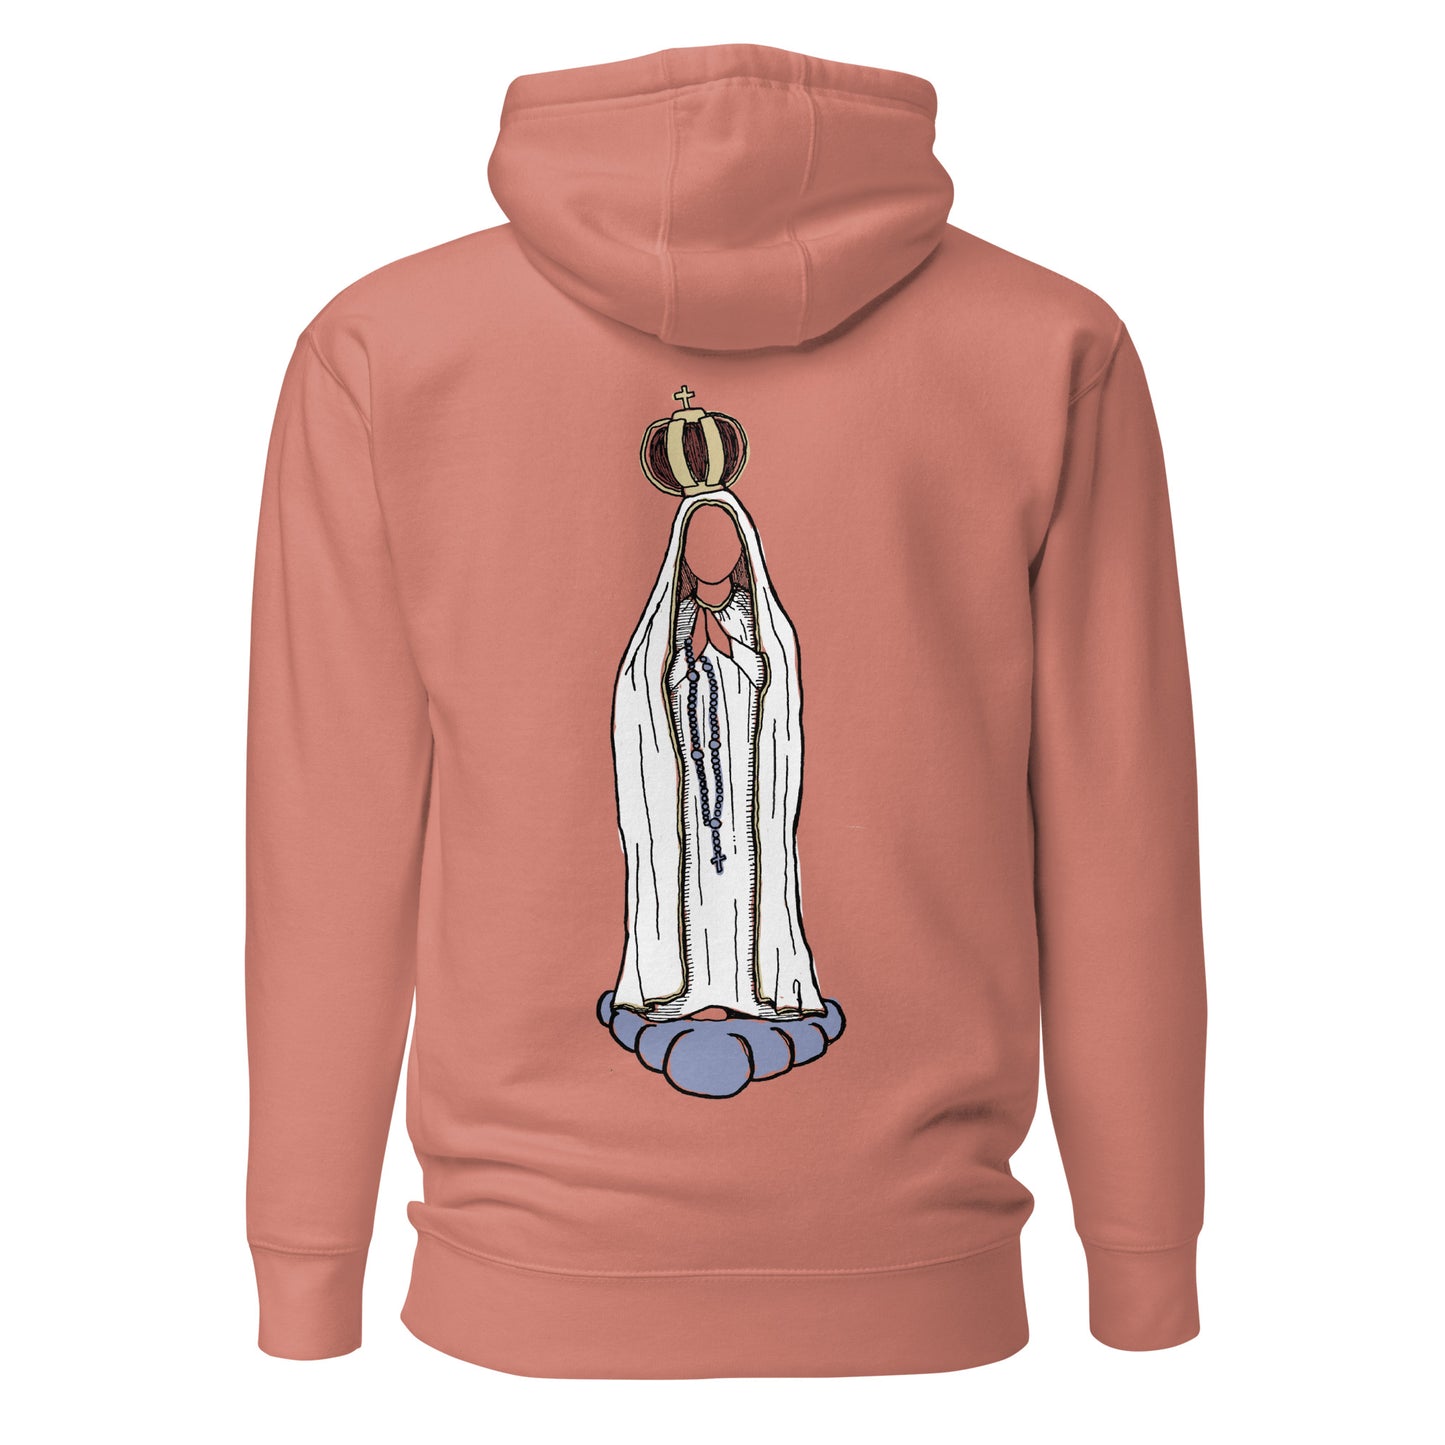 "Our Lady of Fatima" - Unisex Hoodie